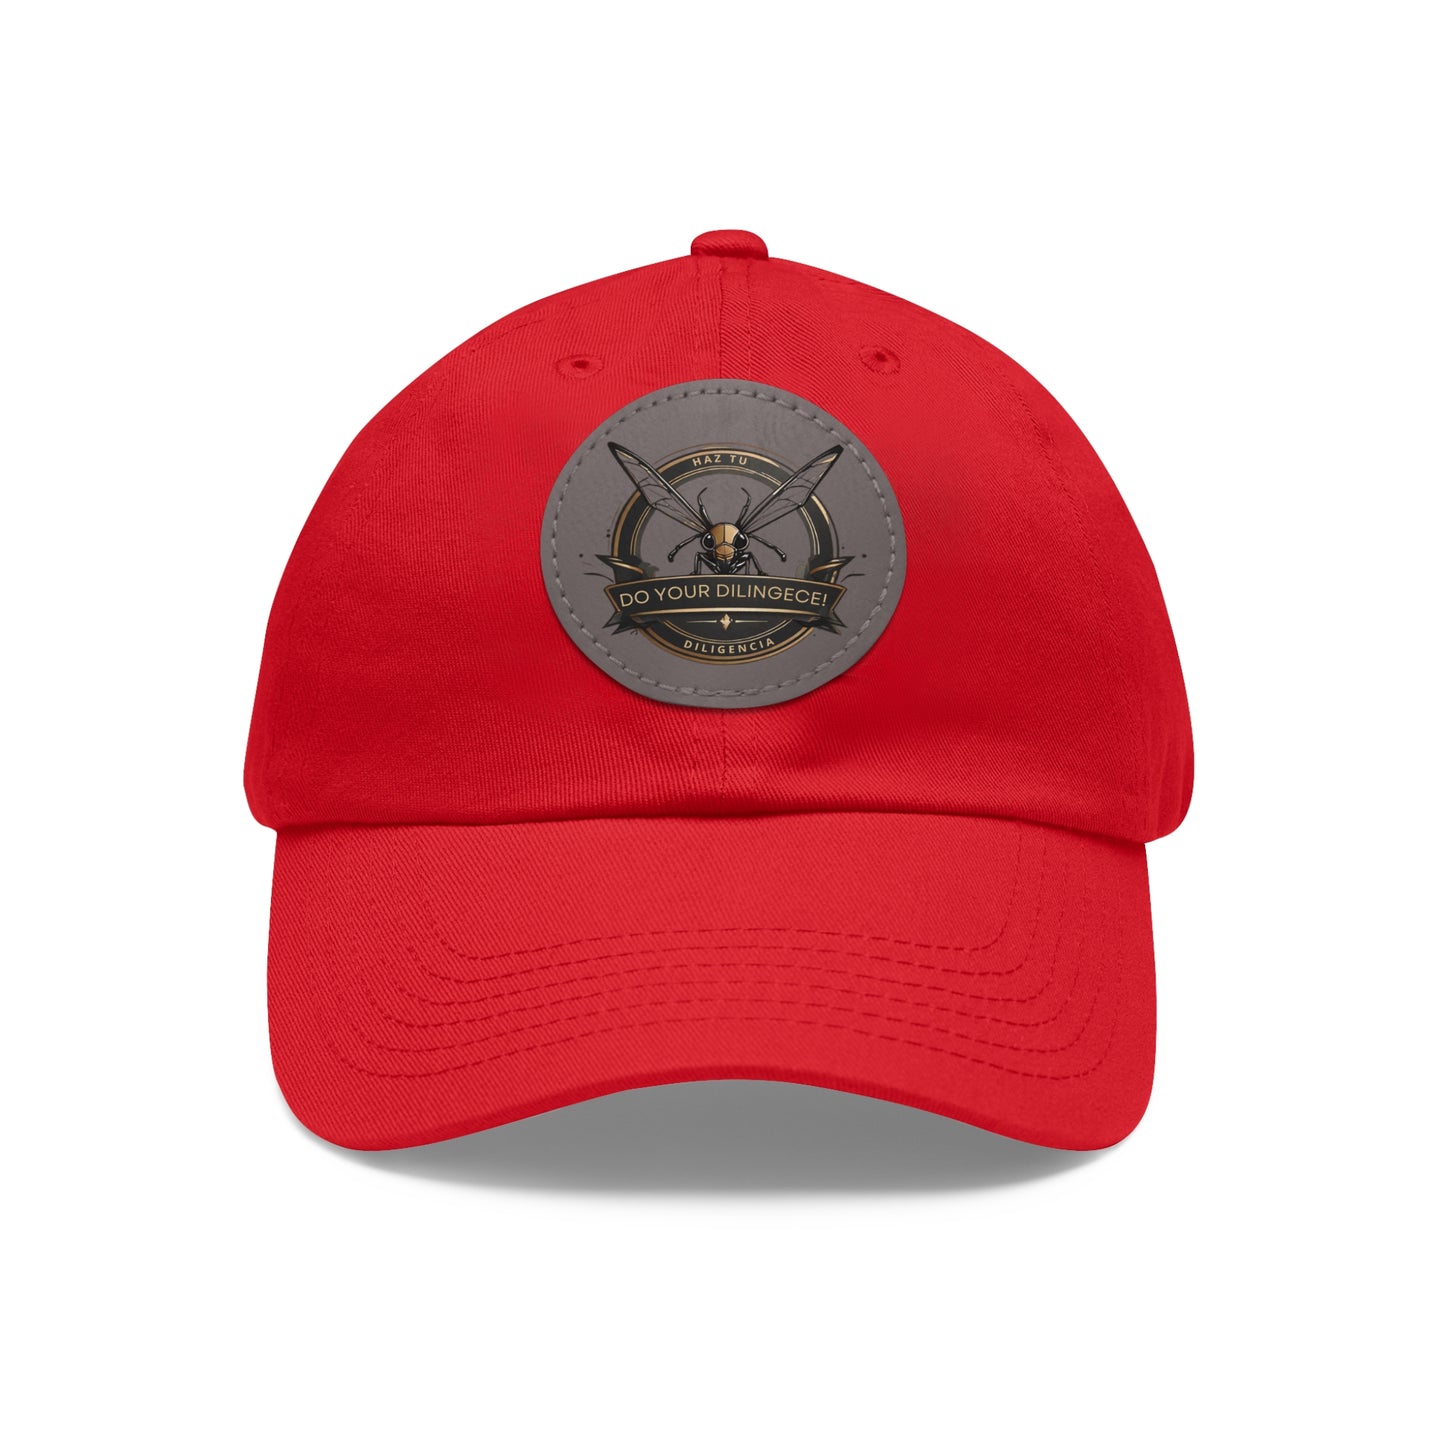 DYD Do Your Diligence! Dad Hat with Leather Patch (Round)